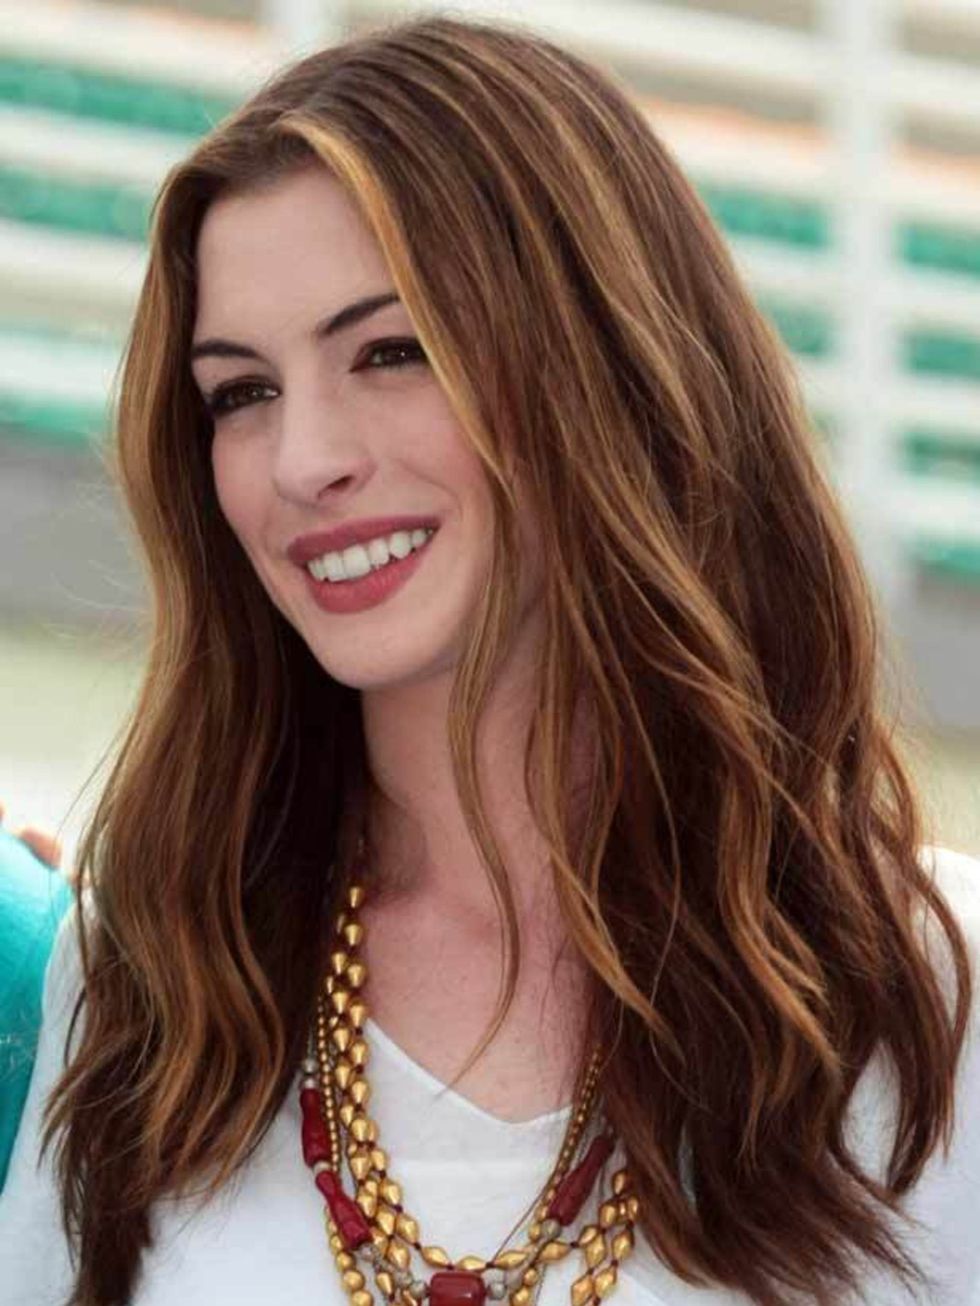 <p><a href="http://www.elleuk.com/beauty/celeb-beauty/celeb-hair/%28section%29/anne-hathaway-s-oscar-hair-changes">See how to get all eight of Anne's Oscars hairstyles...</a></p>